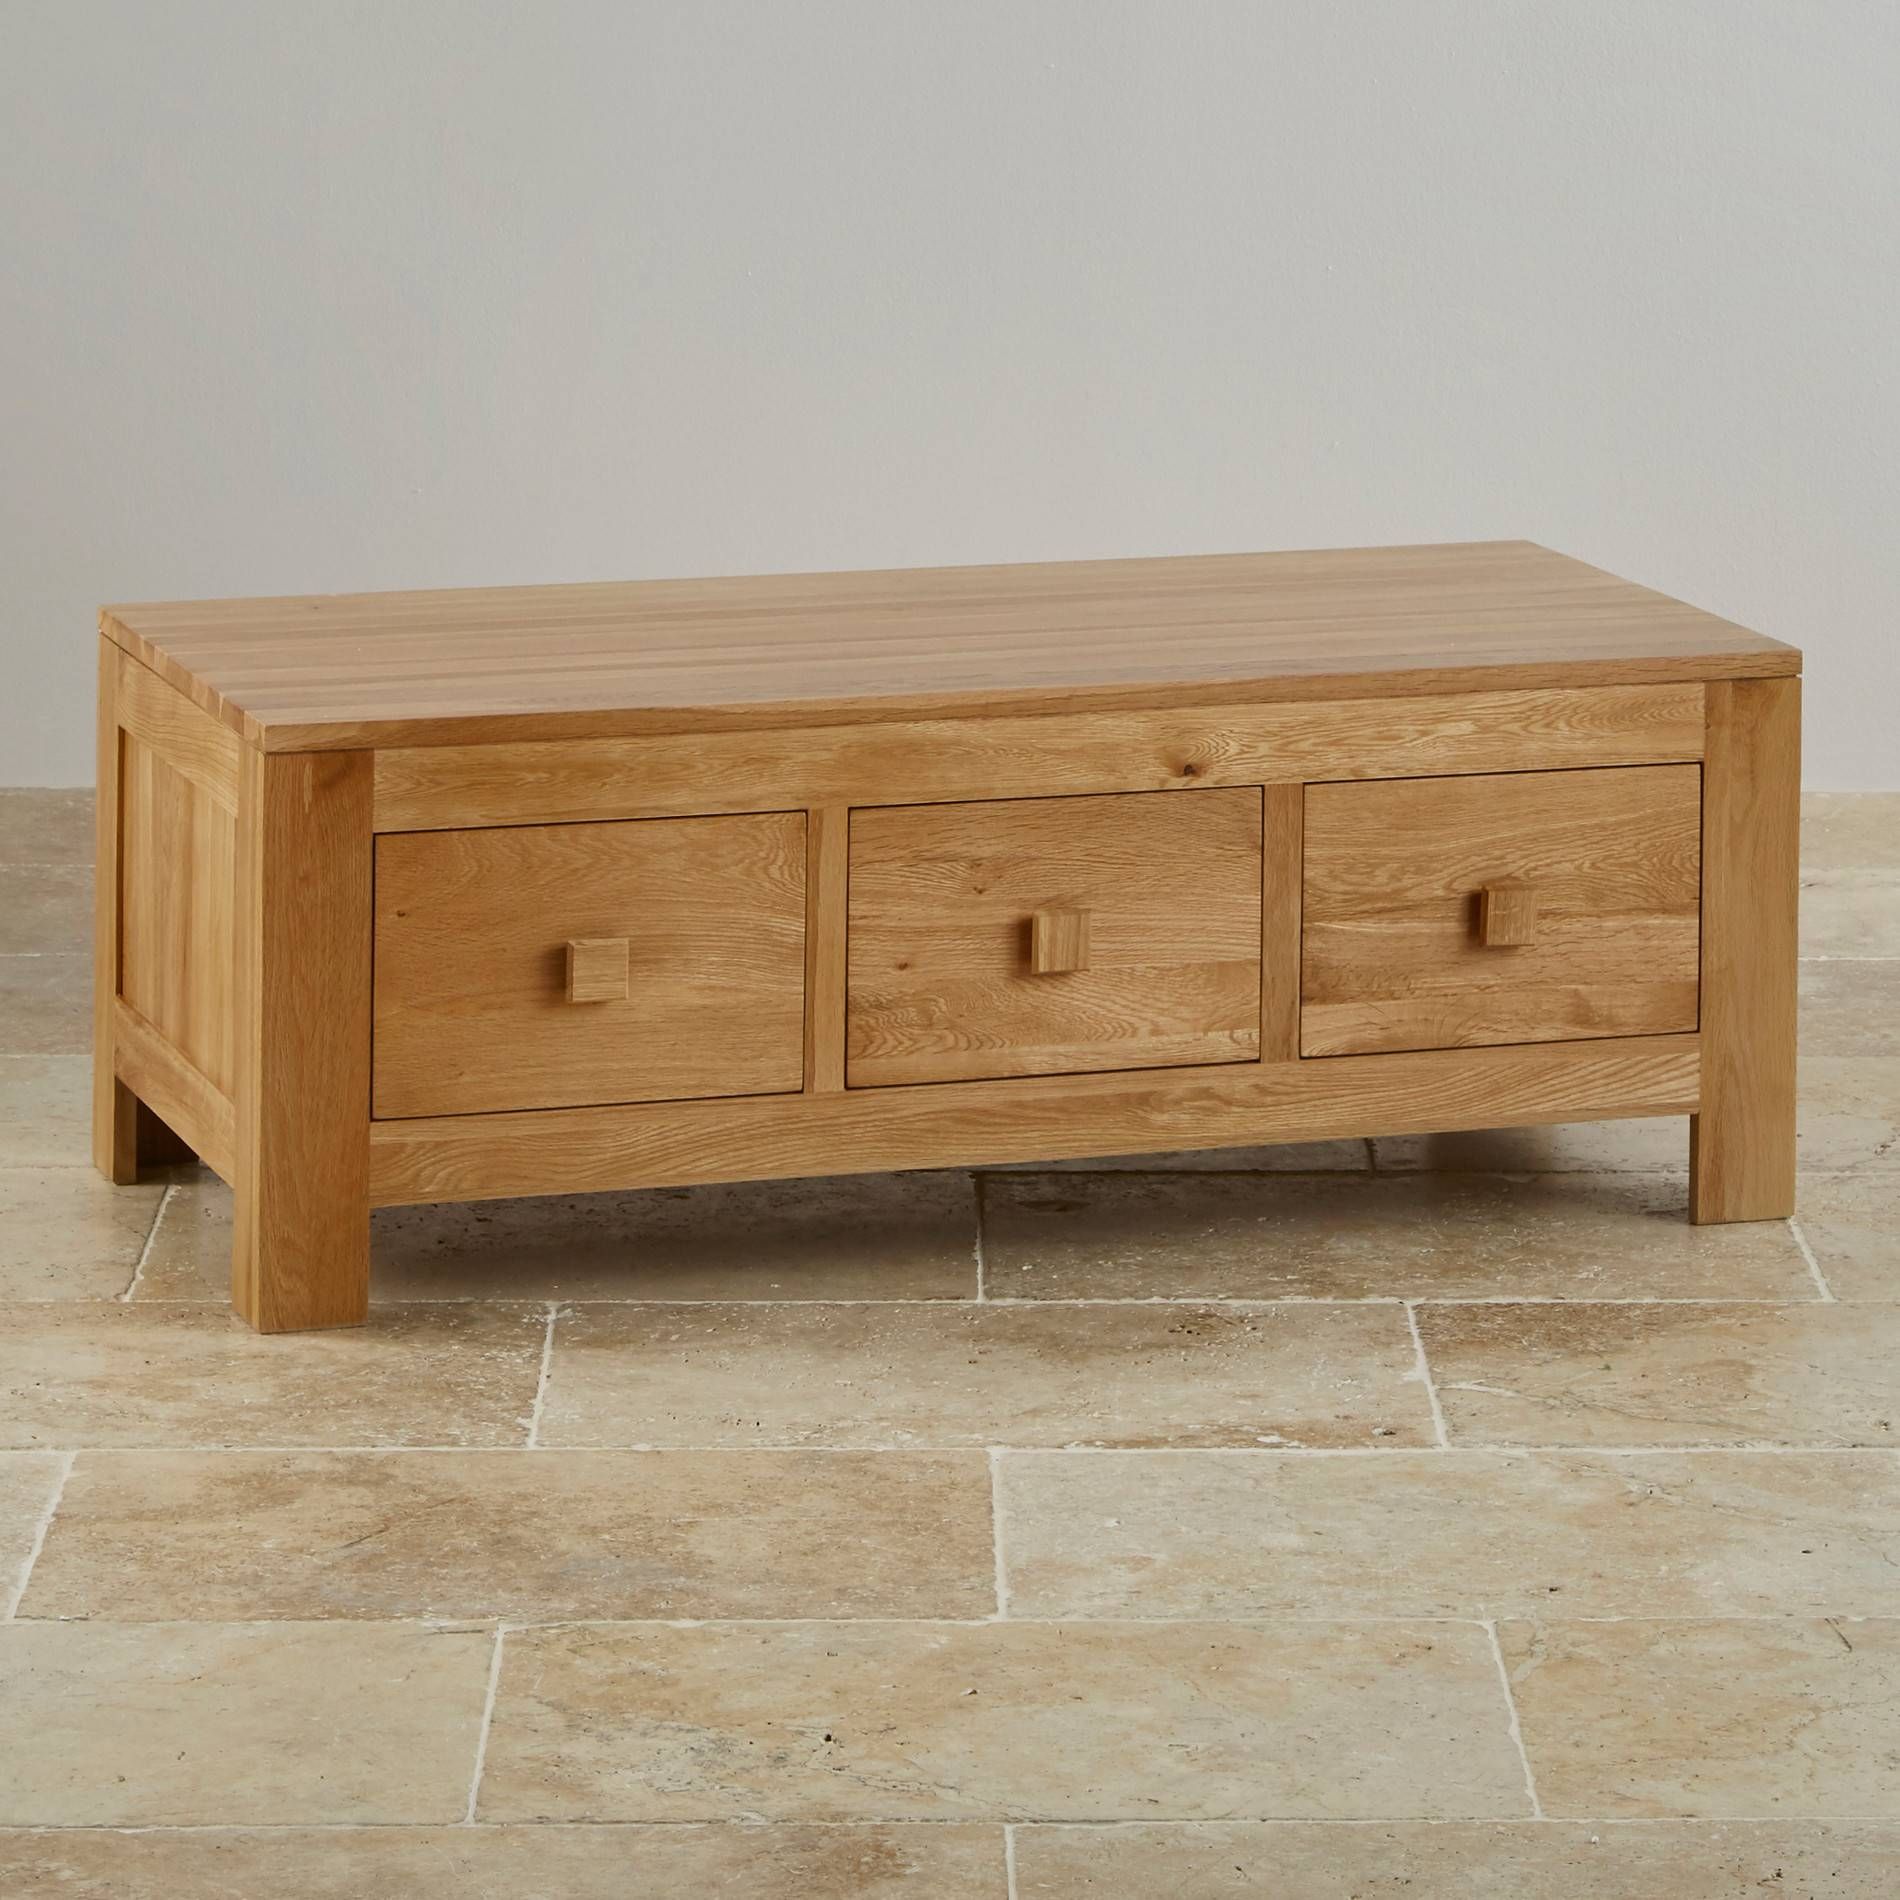 Oakdale 6 Drawer Coffee Table In Natural Solid Oak Inside Oak Furniture Coffee Tables (View 1 of 15)